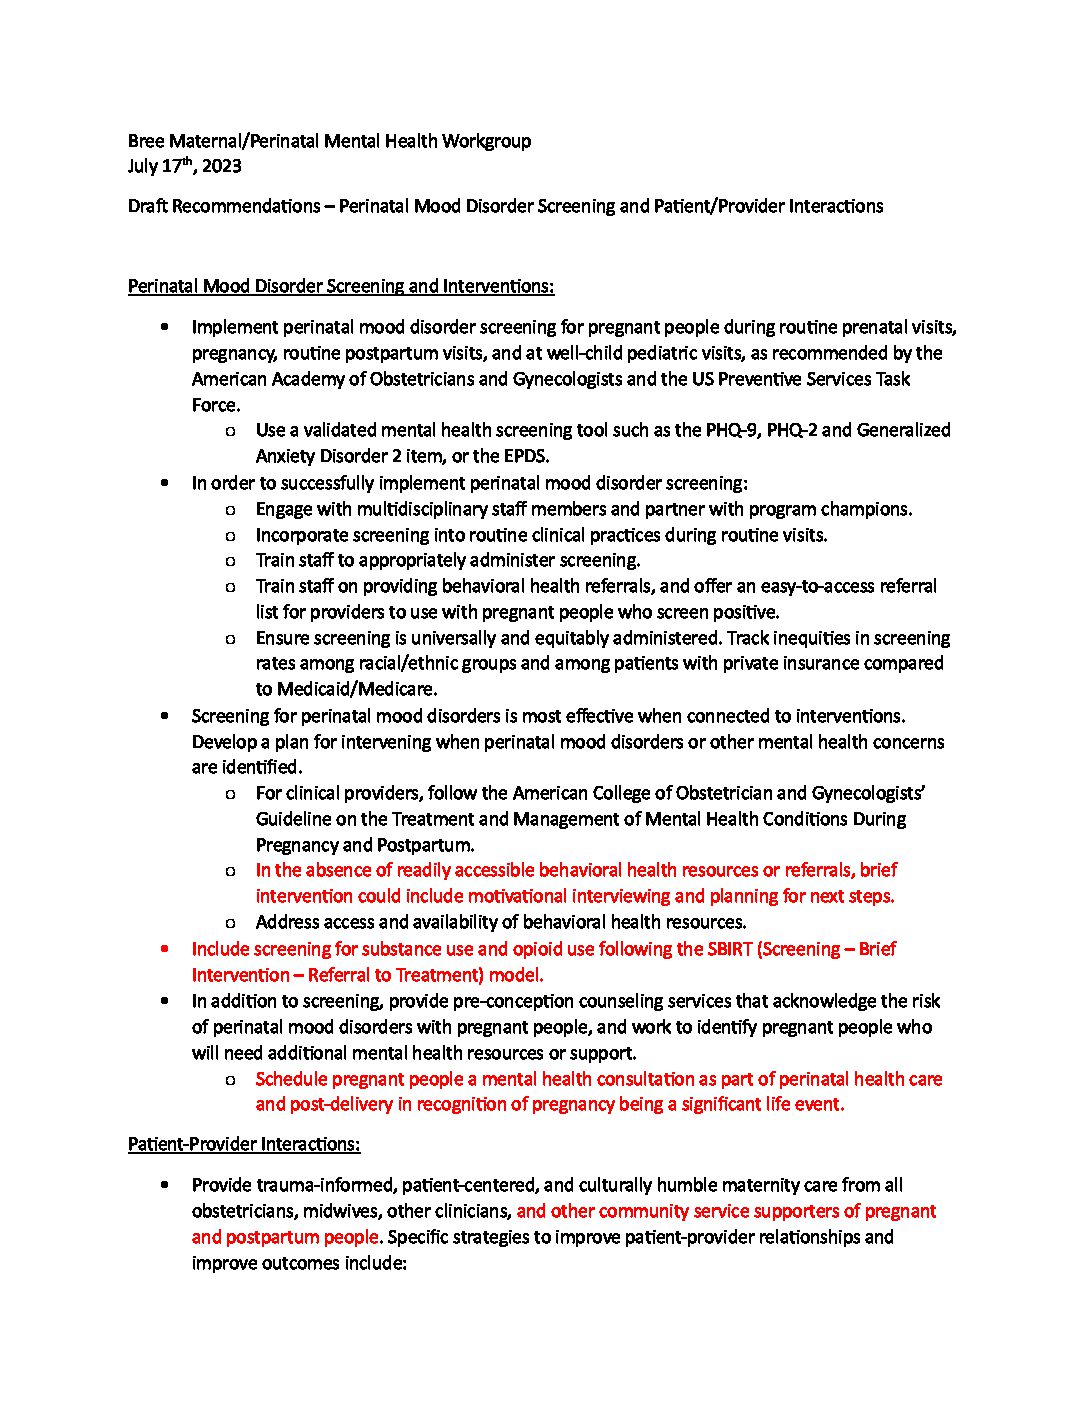 Bree Maternal Mental Health Draft Recommendations_23_0717 A